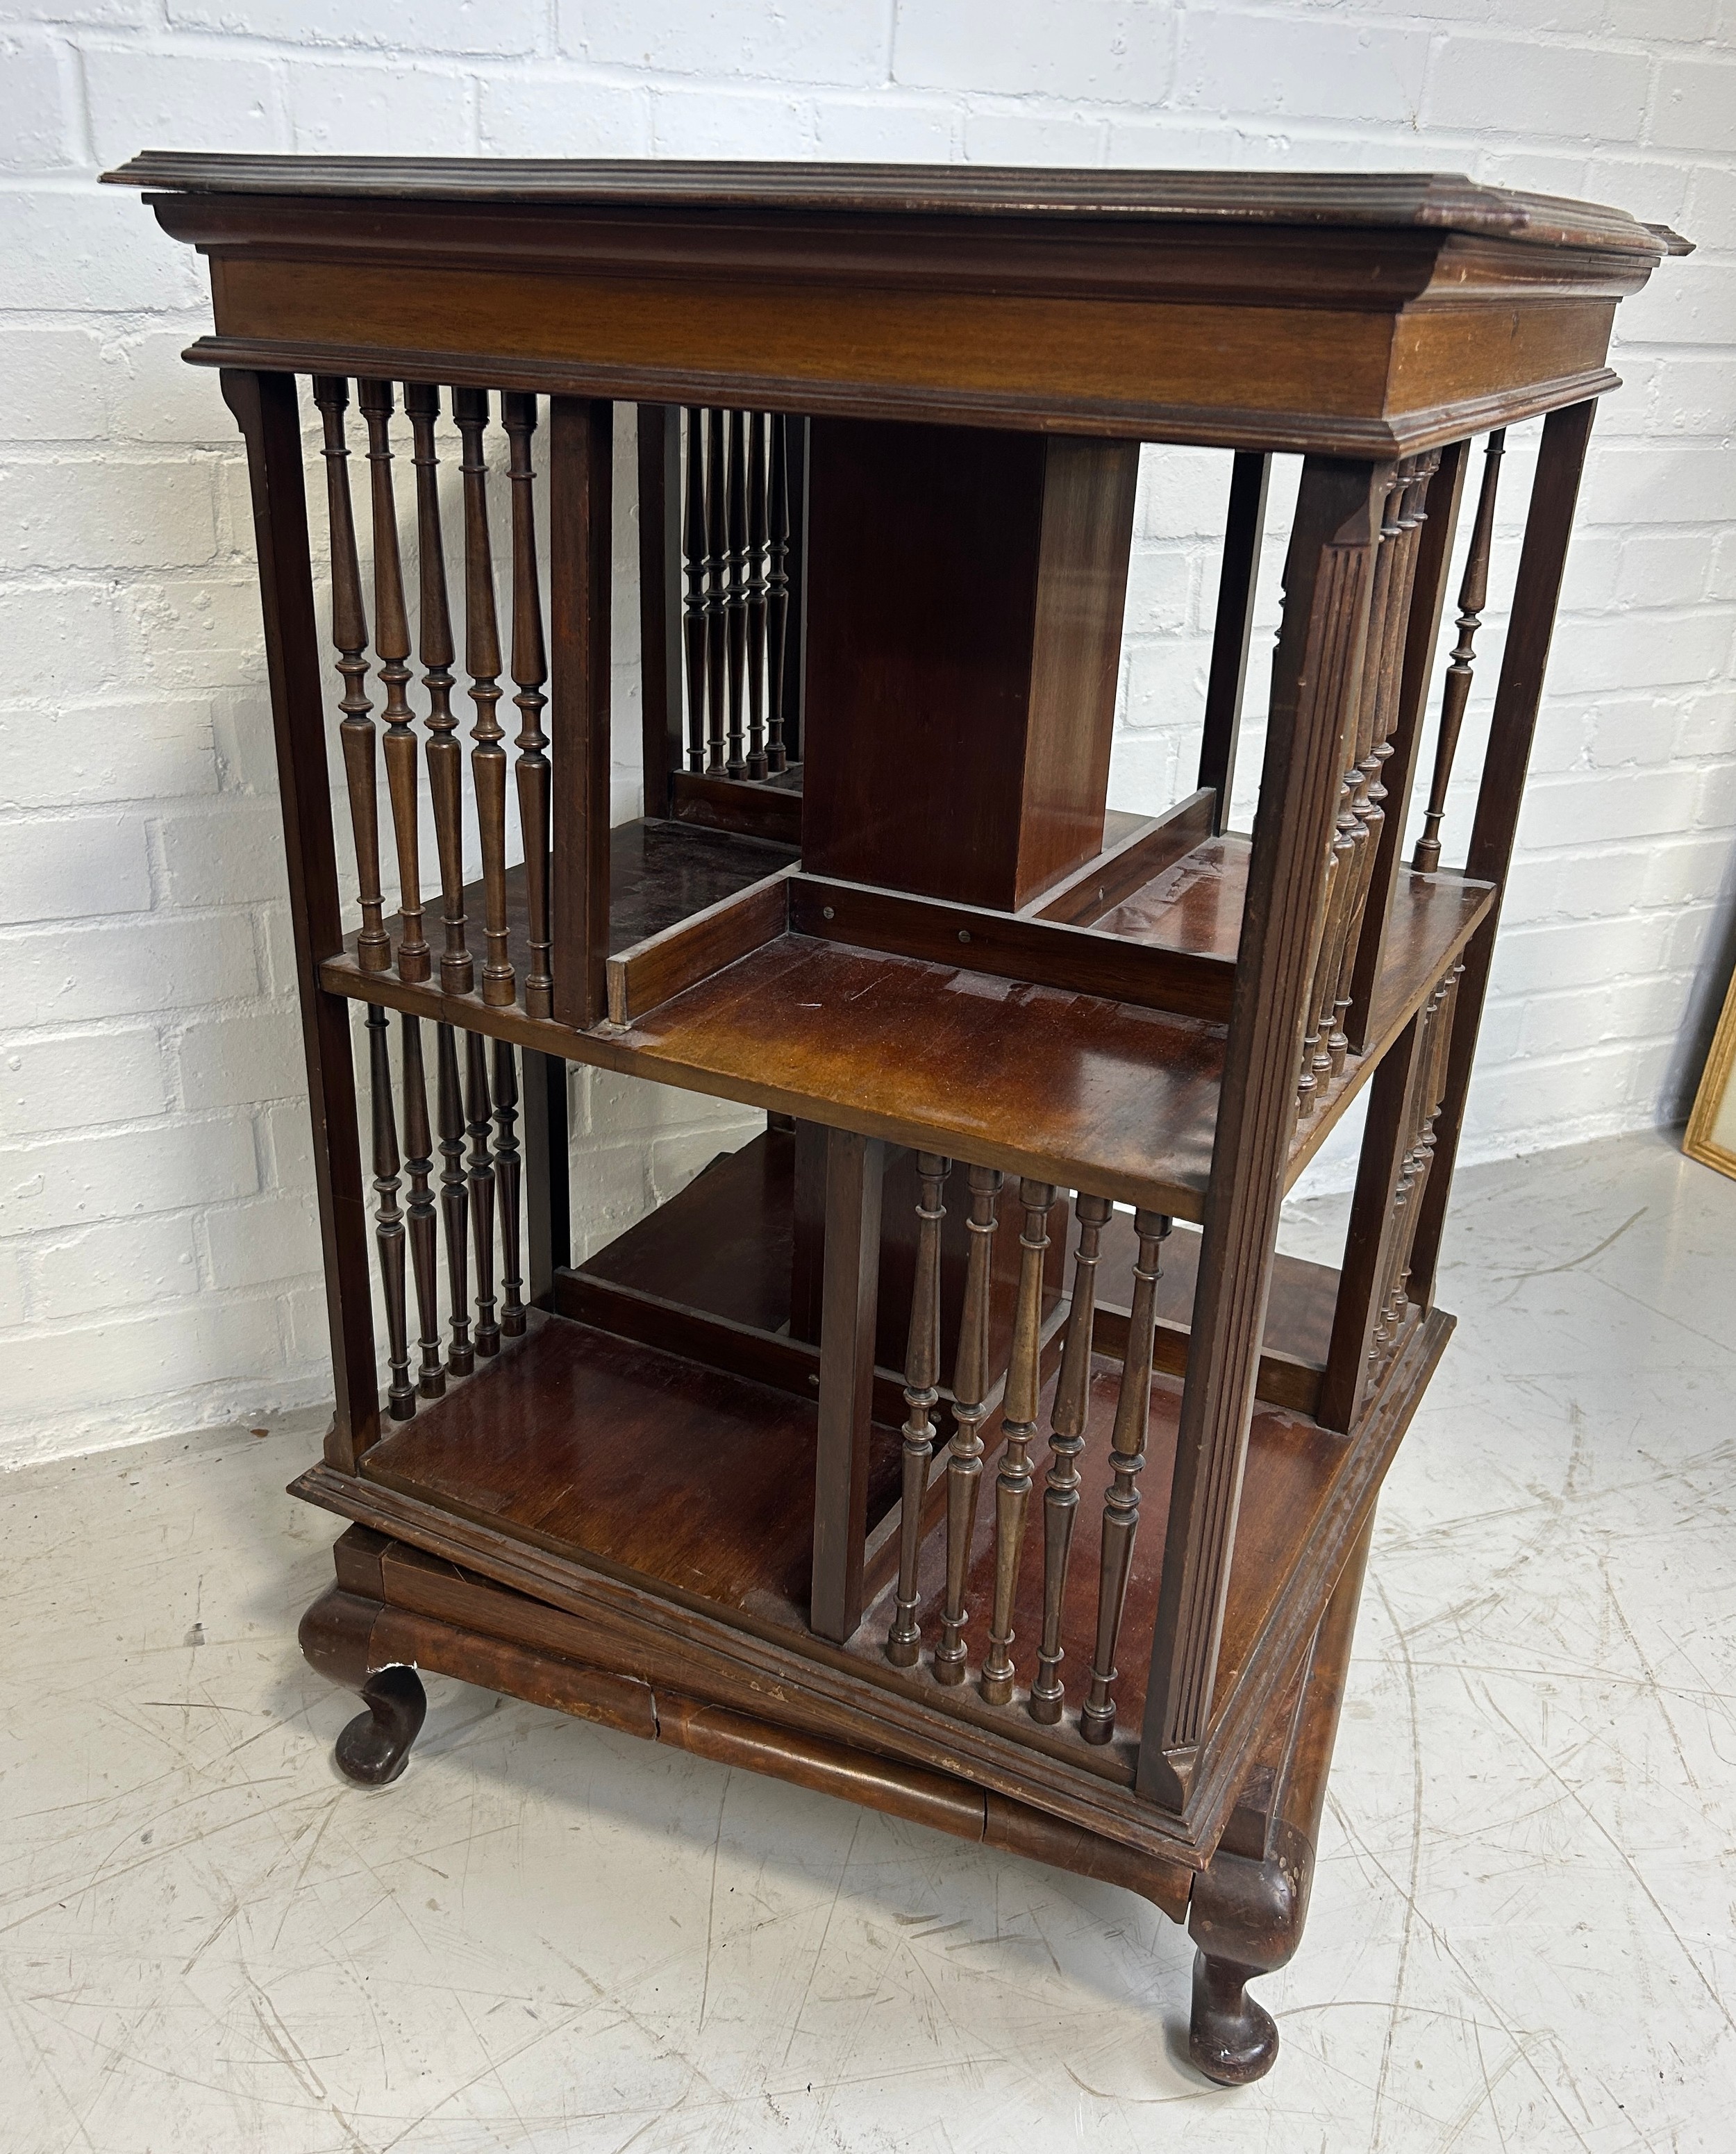 AN EDWARDIAN MAHOGANY TWO TIER REVOLVING BOOKCASE, 84cm x 60cm x 60cm - Image 2 of 4